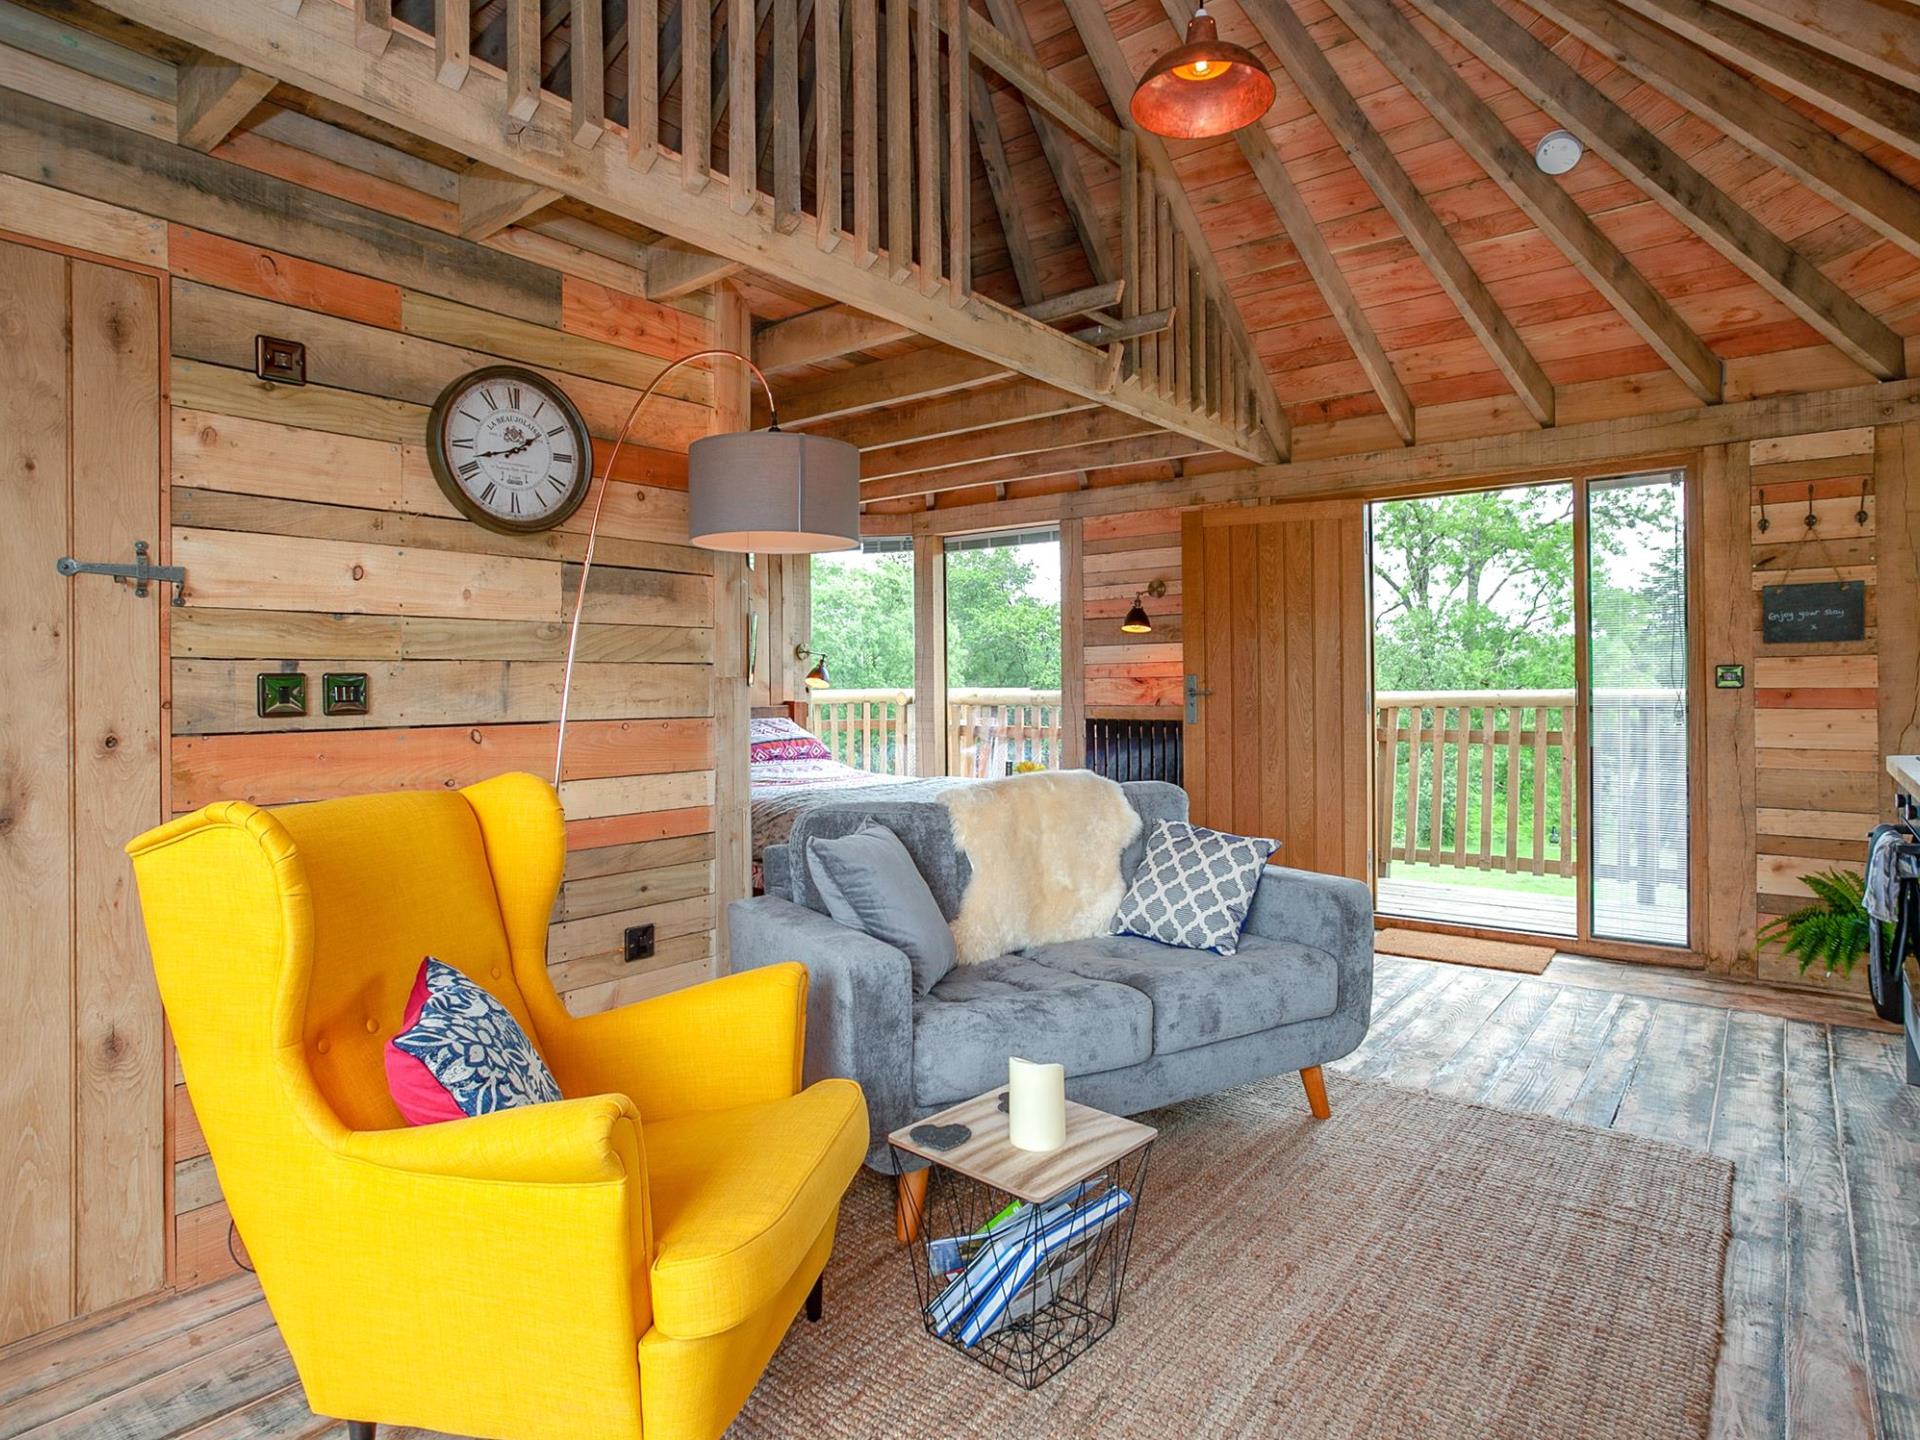 Living space at Trawscwm Treehouse